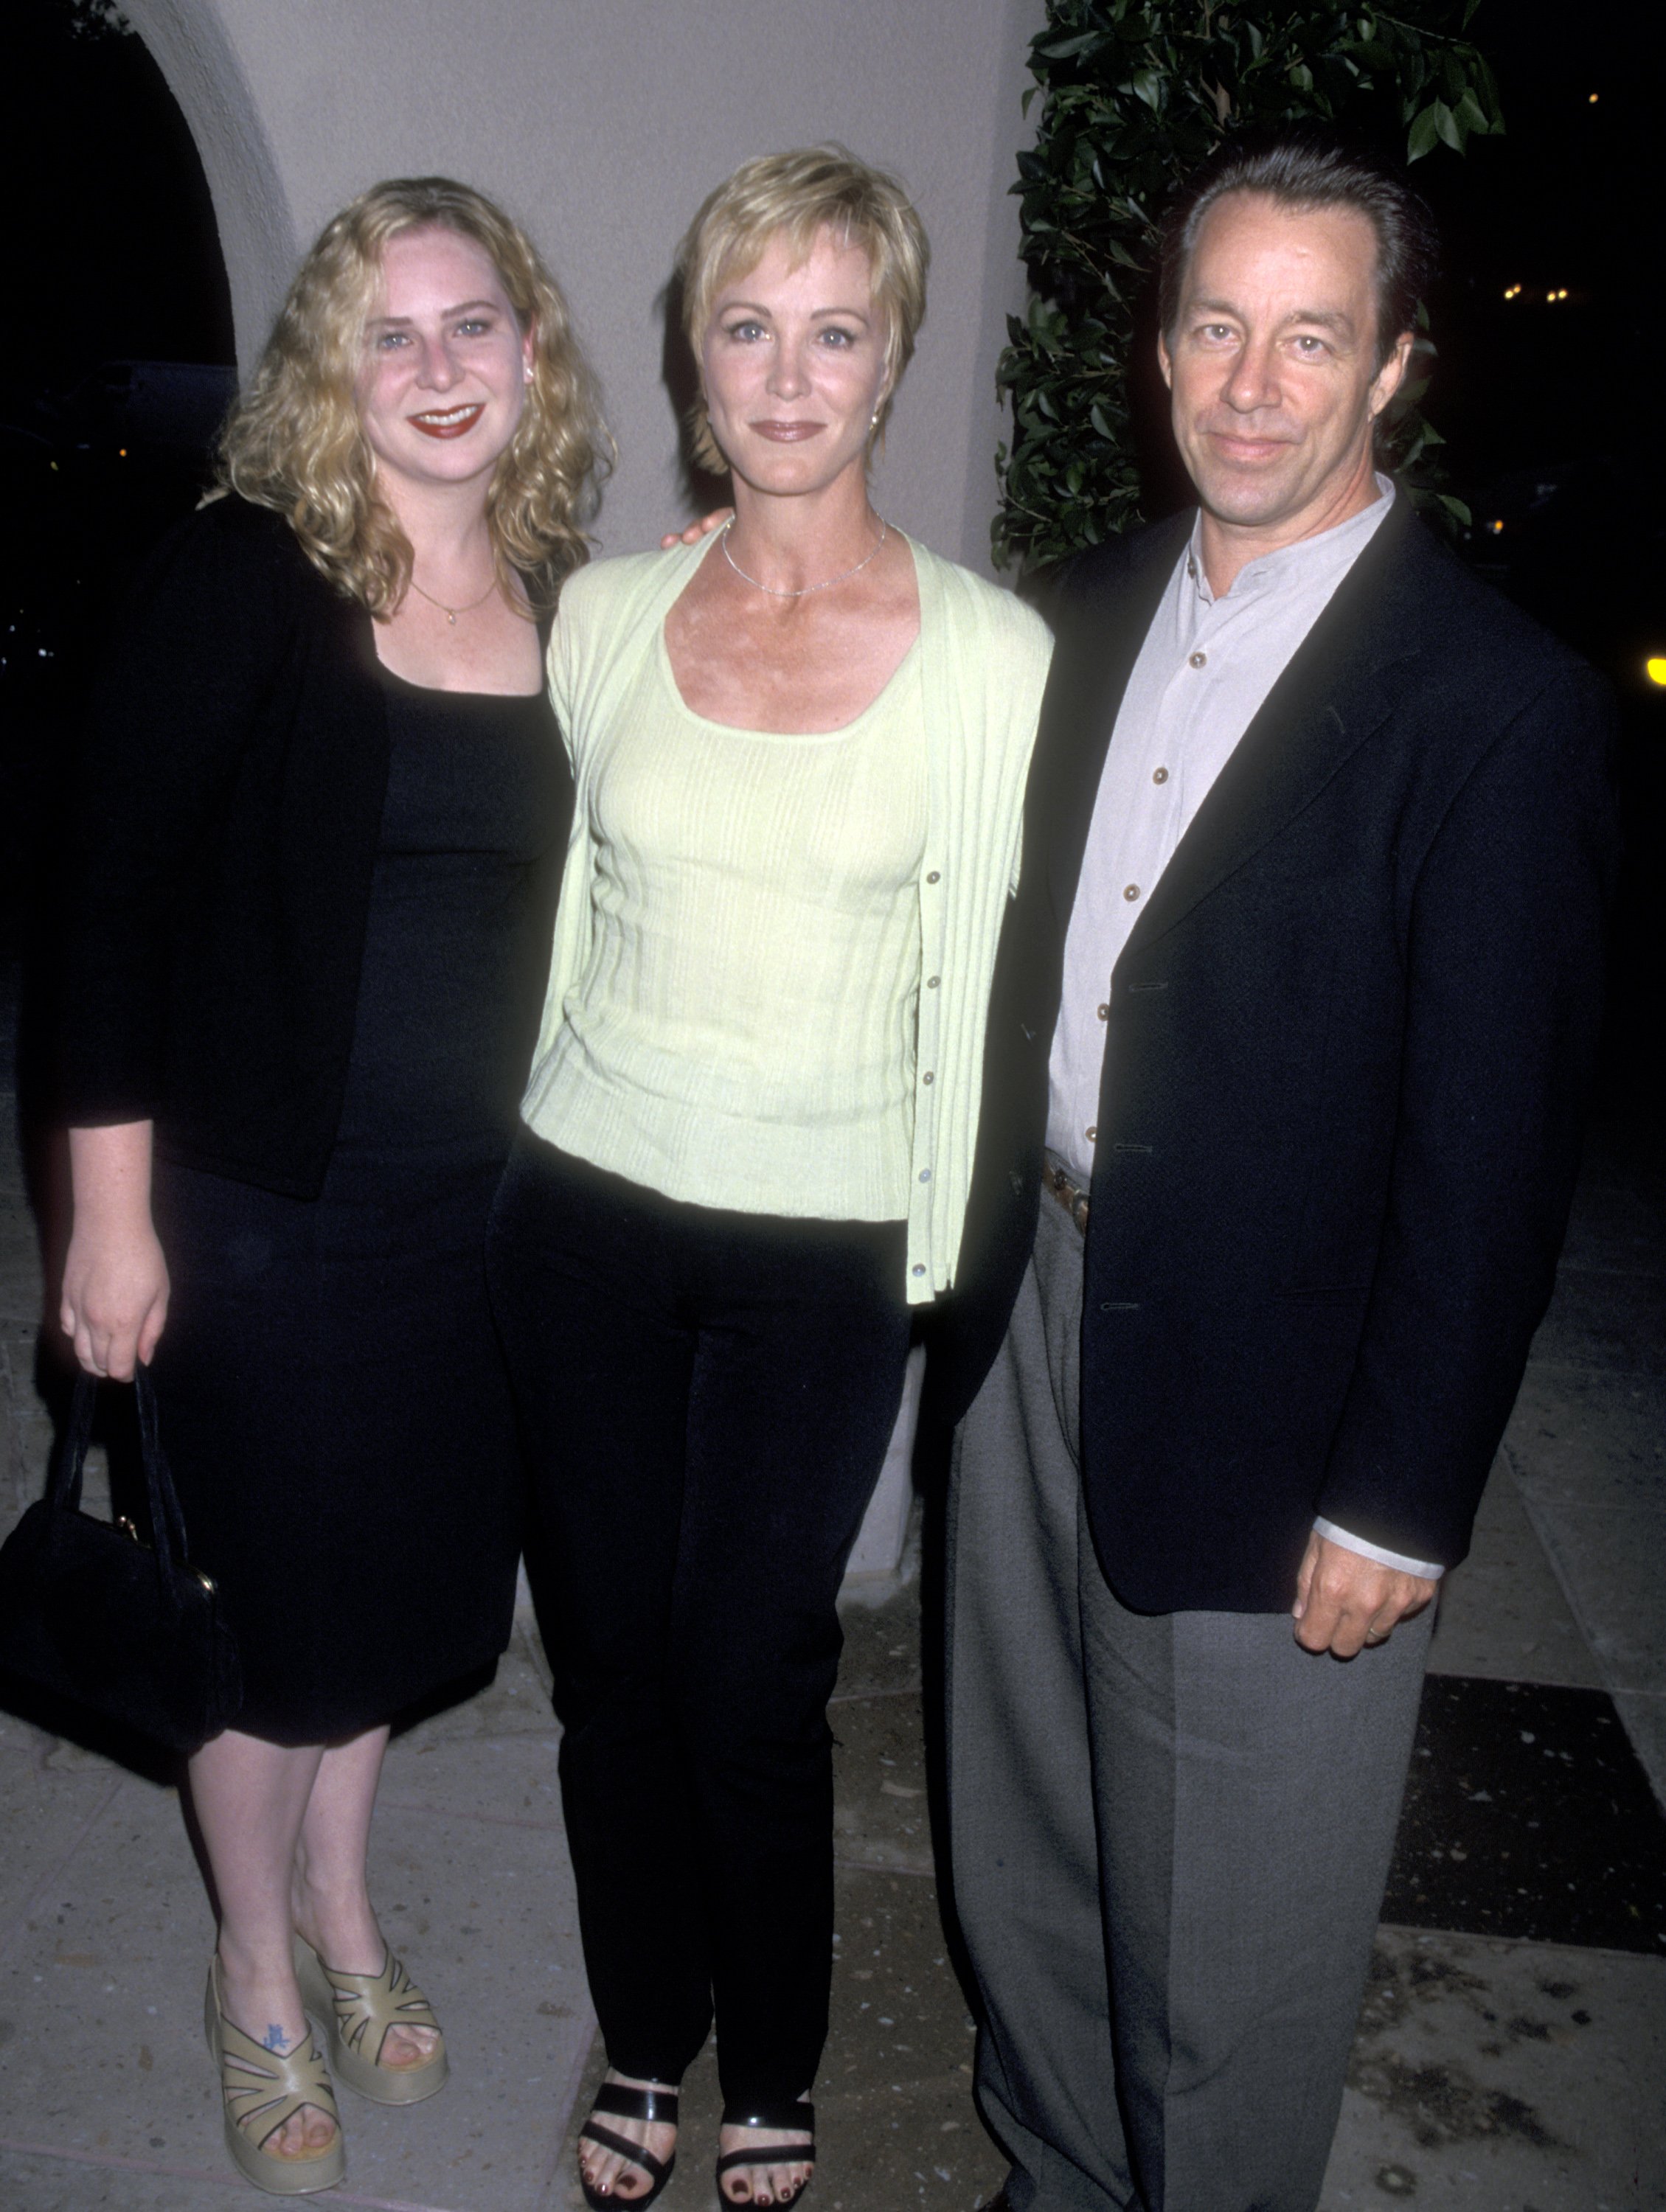 Ashley Kerns, Joanna Kerns, and Marc Appleton at the "CBS Summer TCA Press Tour" on July 24, 1998, in Pasadena, California | Source: Getty Images